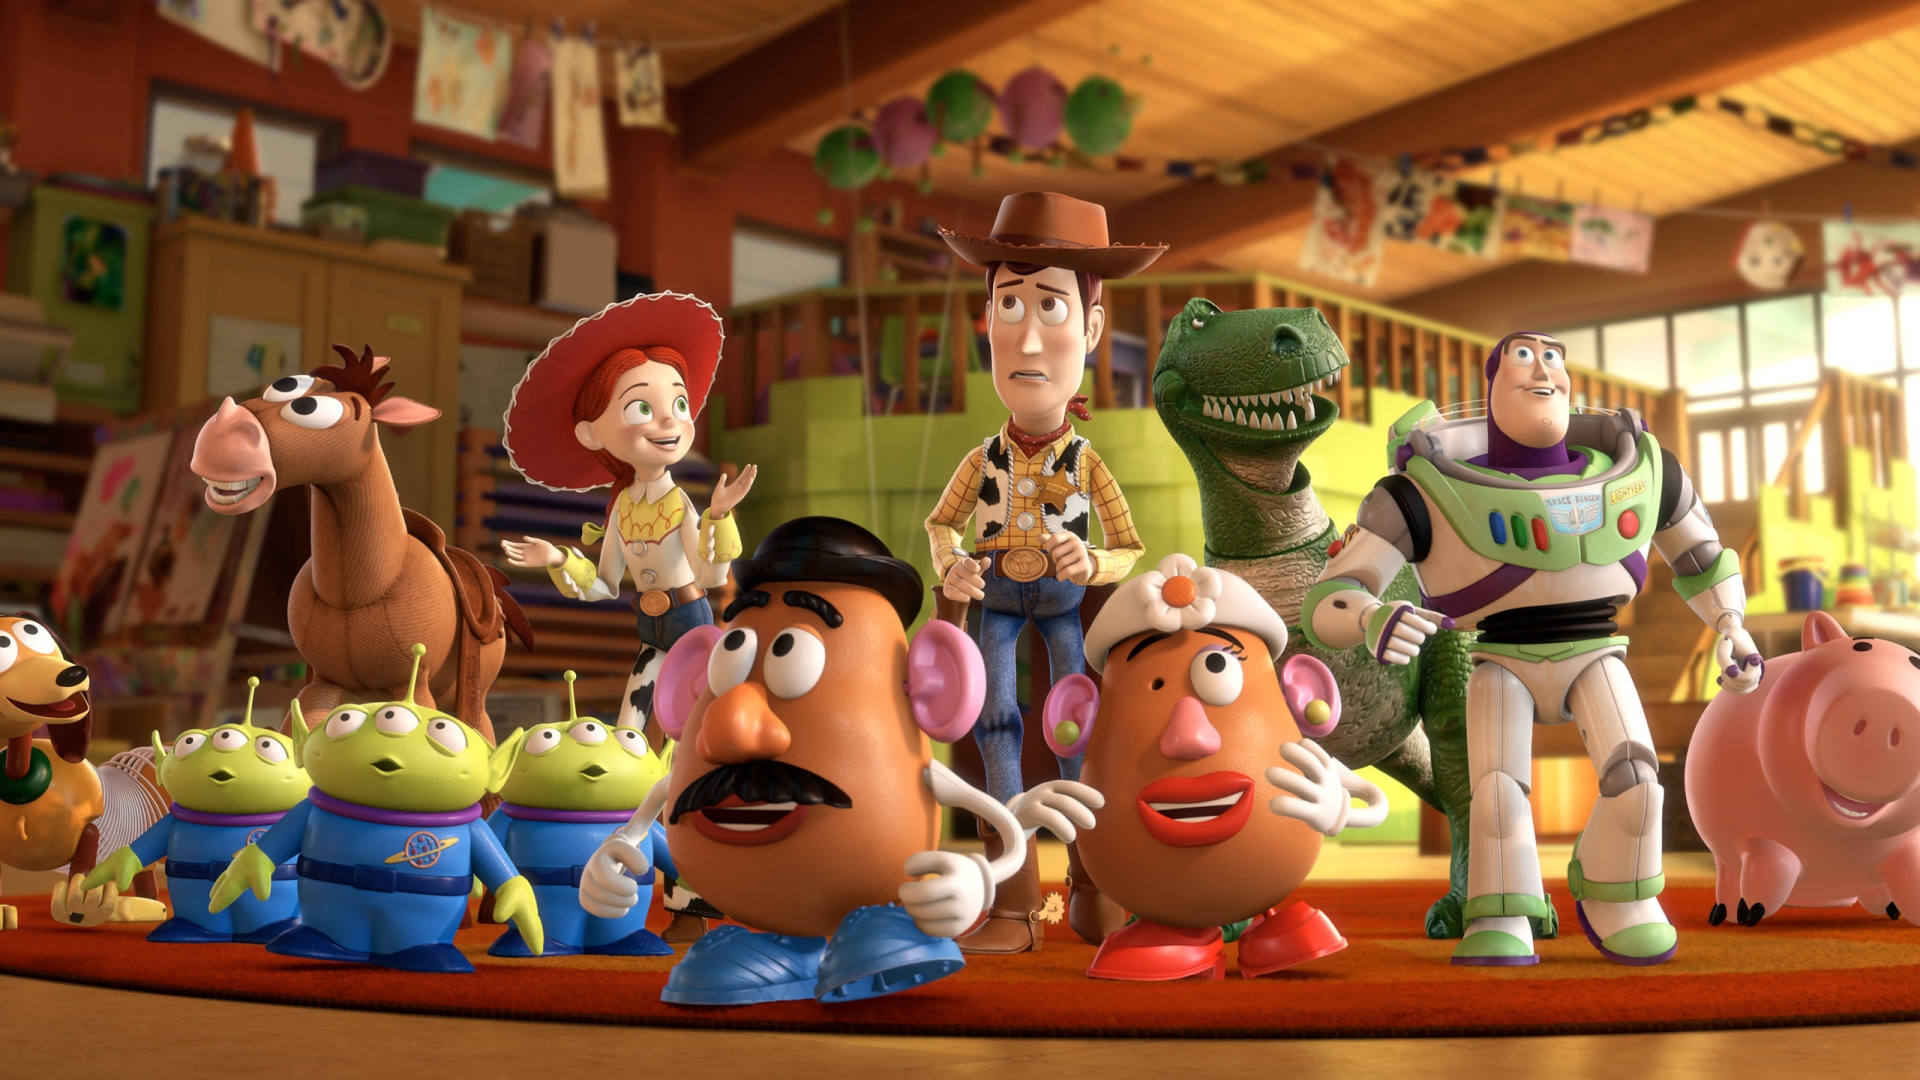 Toy Story 3 Cast for 1920 x 1080 HDTV 1080p resolution